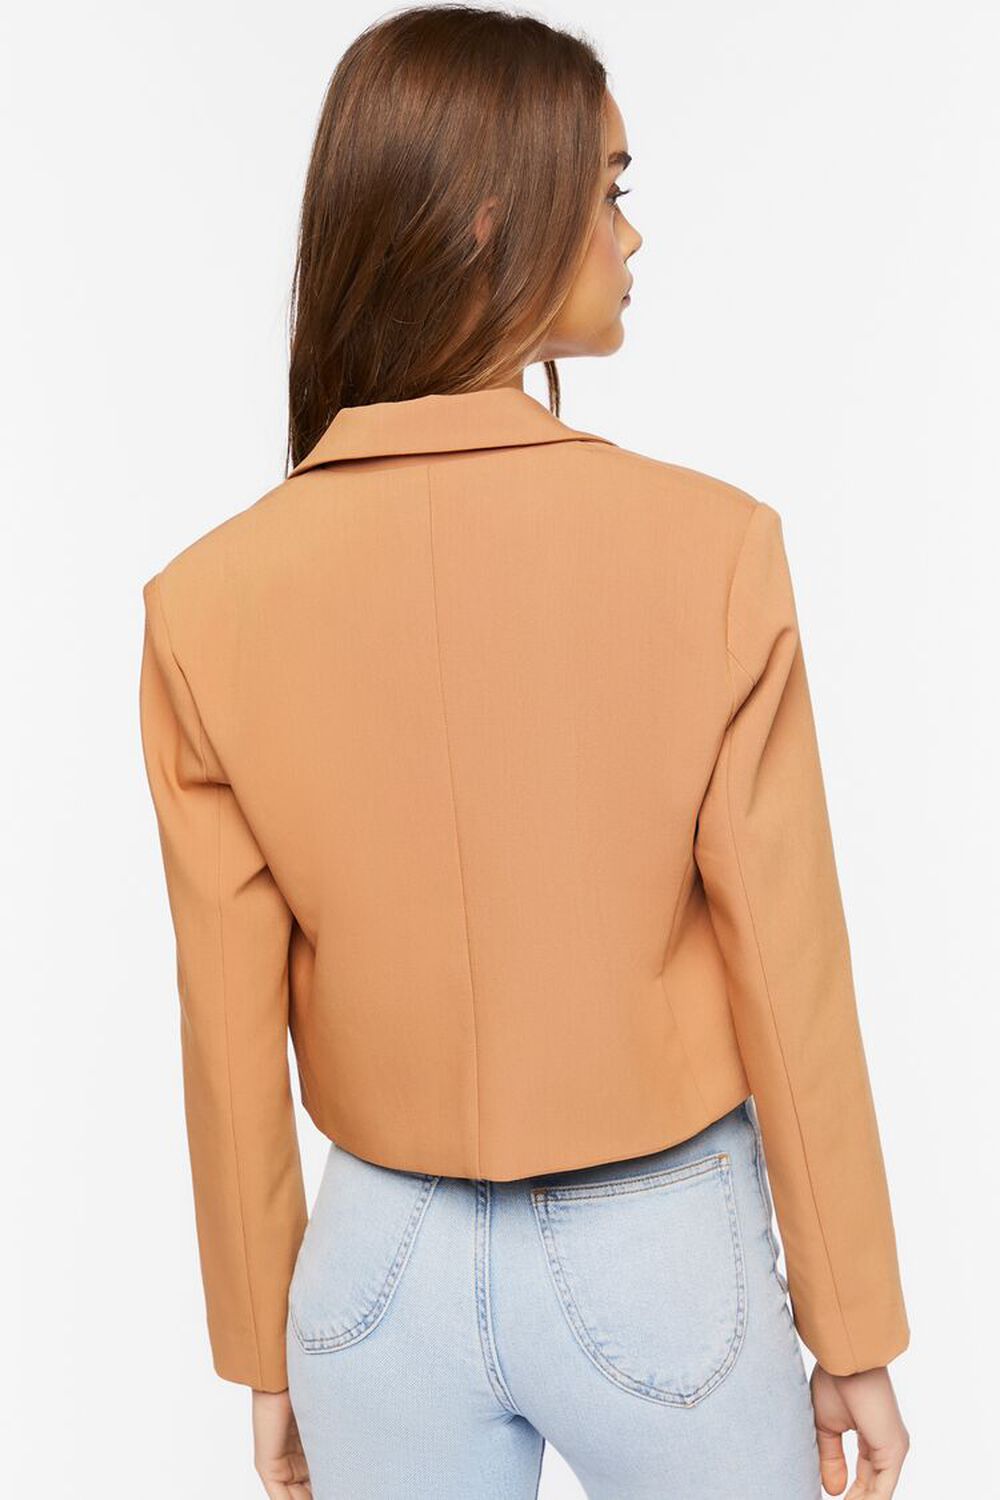 NATURAL Double-Breasted Cropped Blazer, image 3